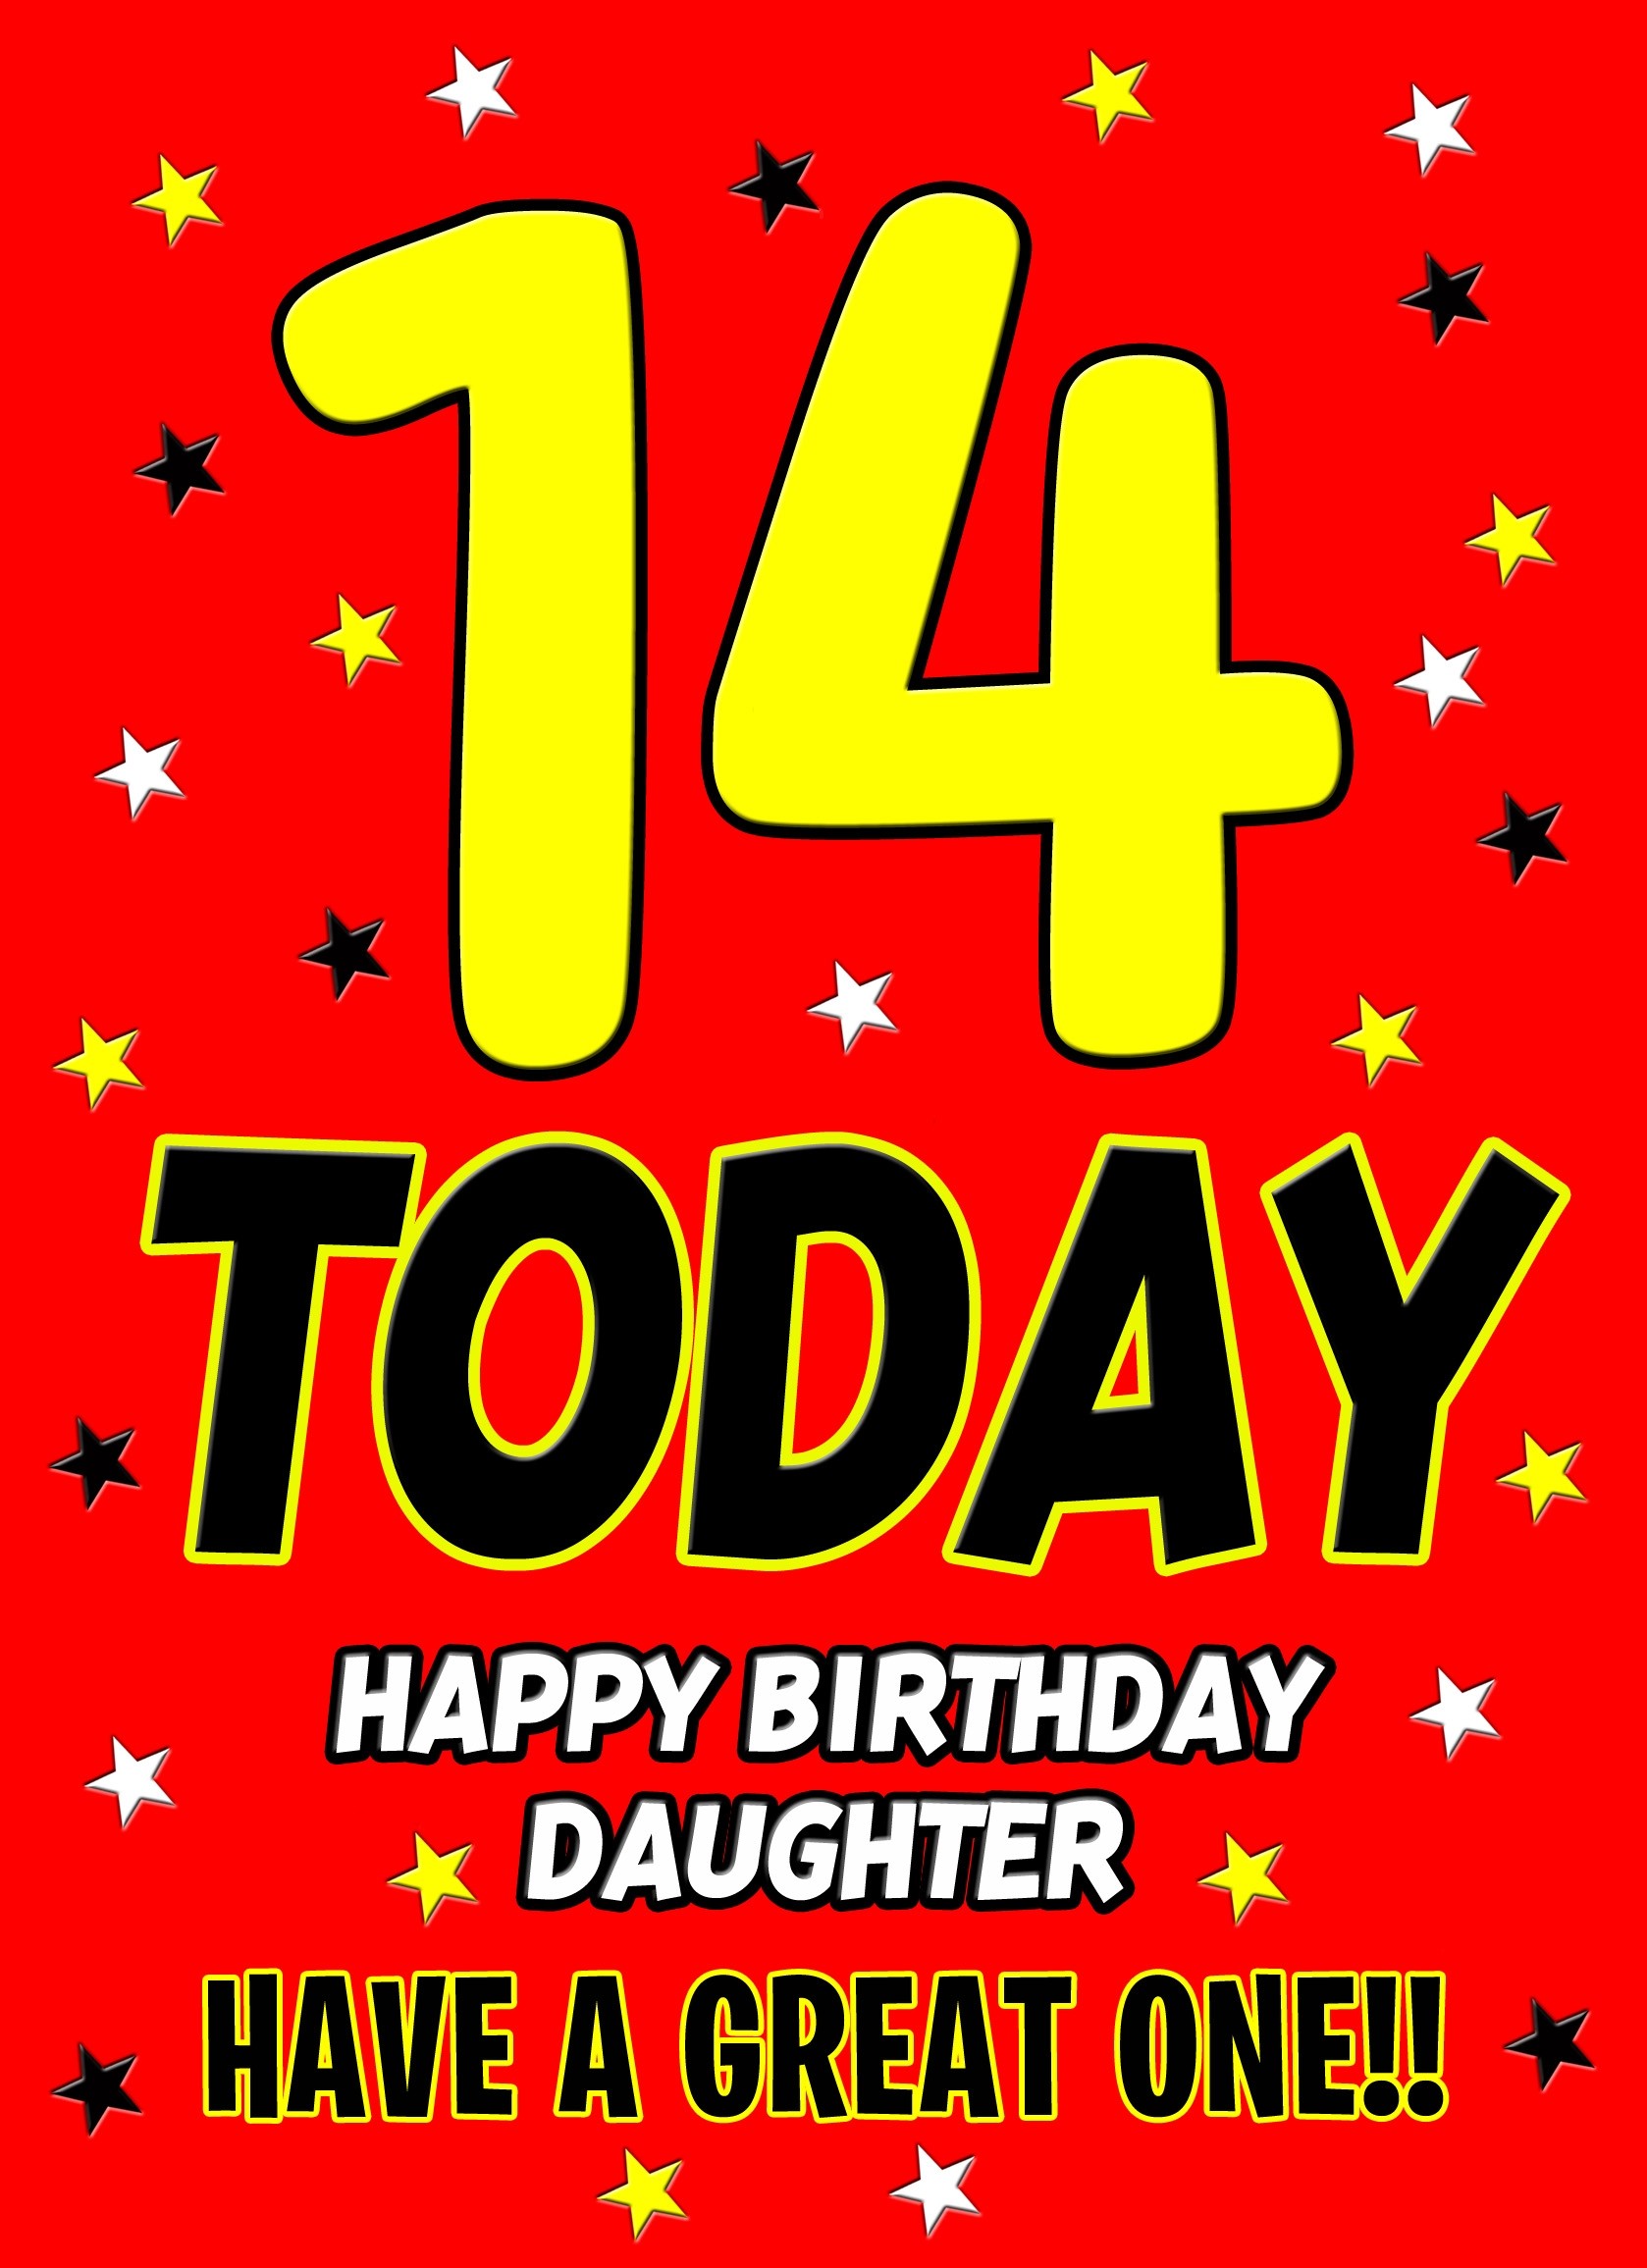 14 Today Birthday Card (Daughter)